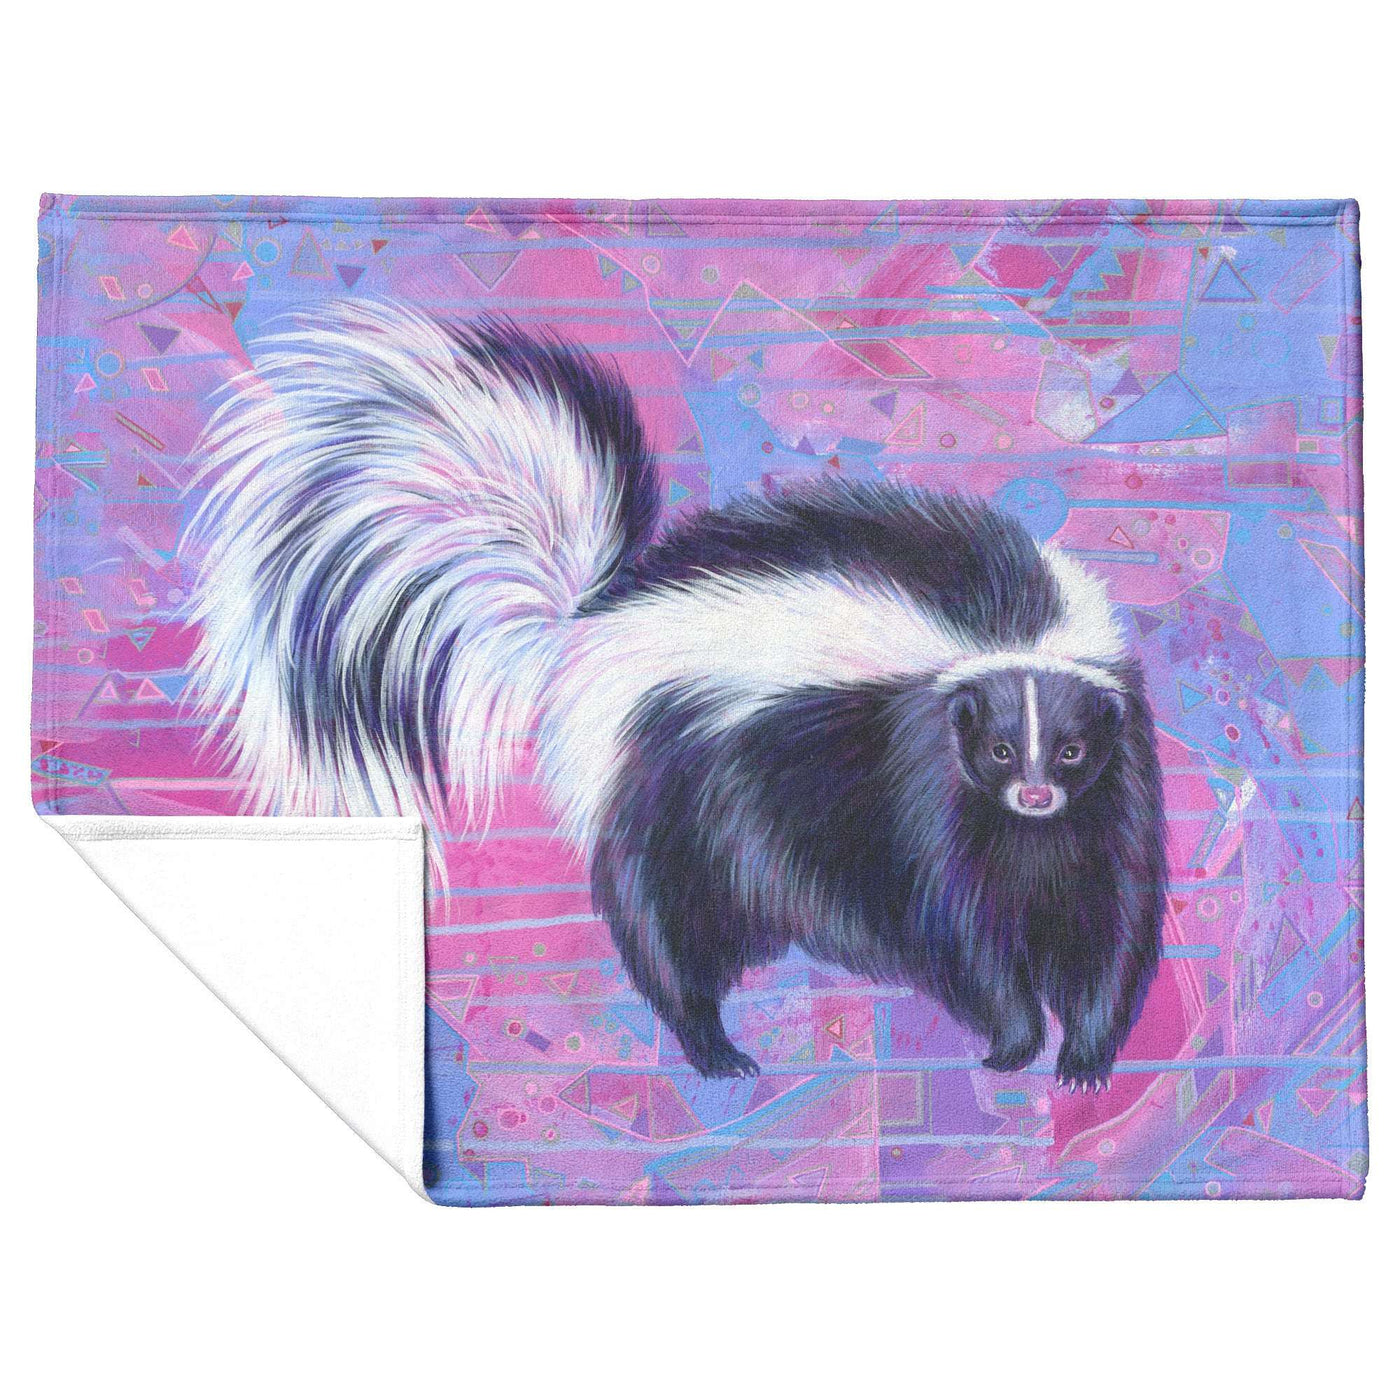 A fleece blanket with a colorful illustration of a skunk on a pink and blue geometric background